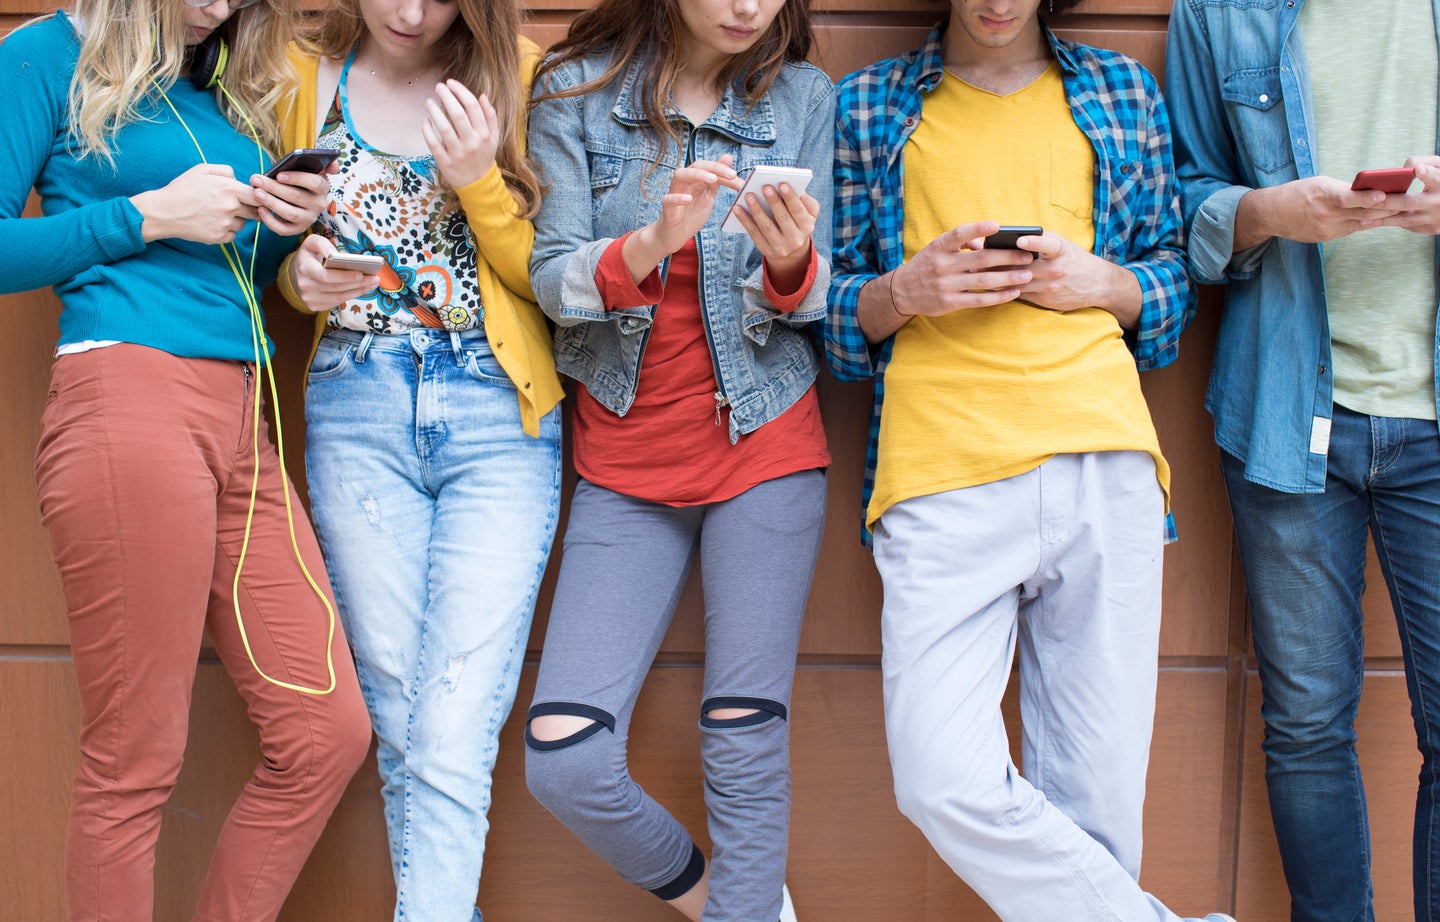 Four teens standing in a row using their smartphones